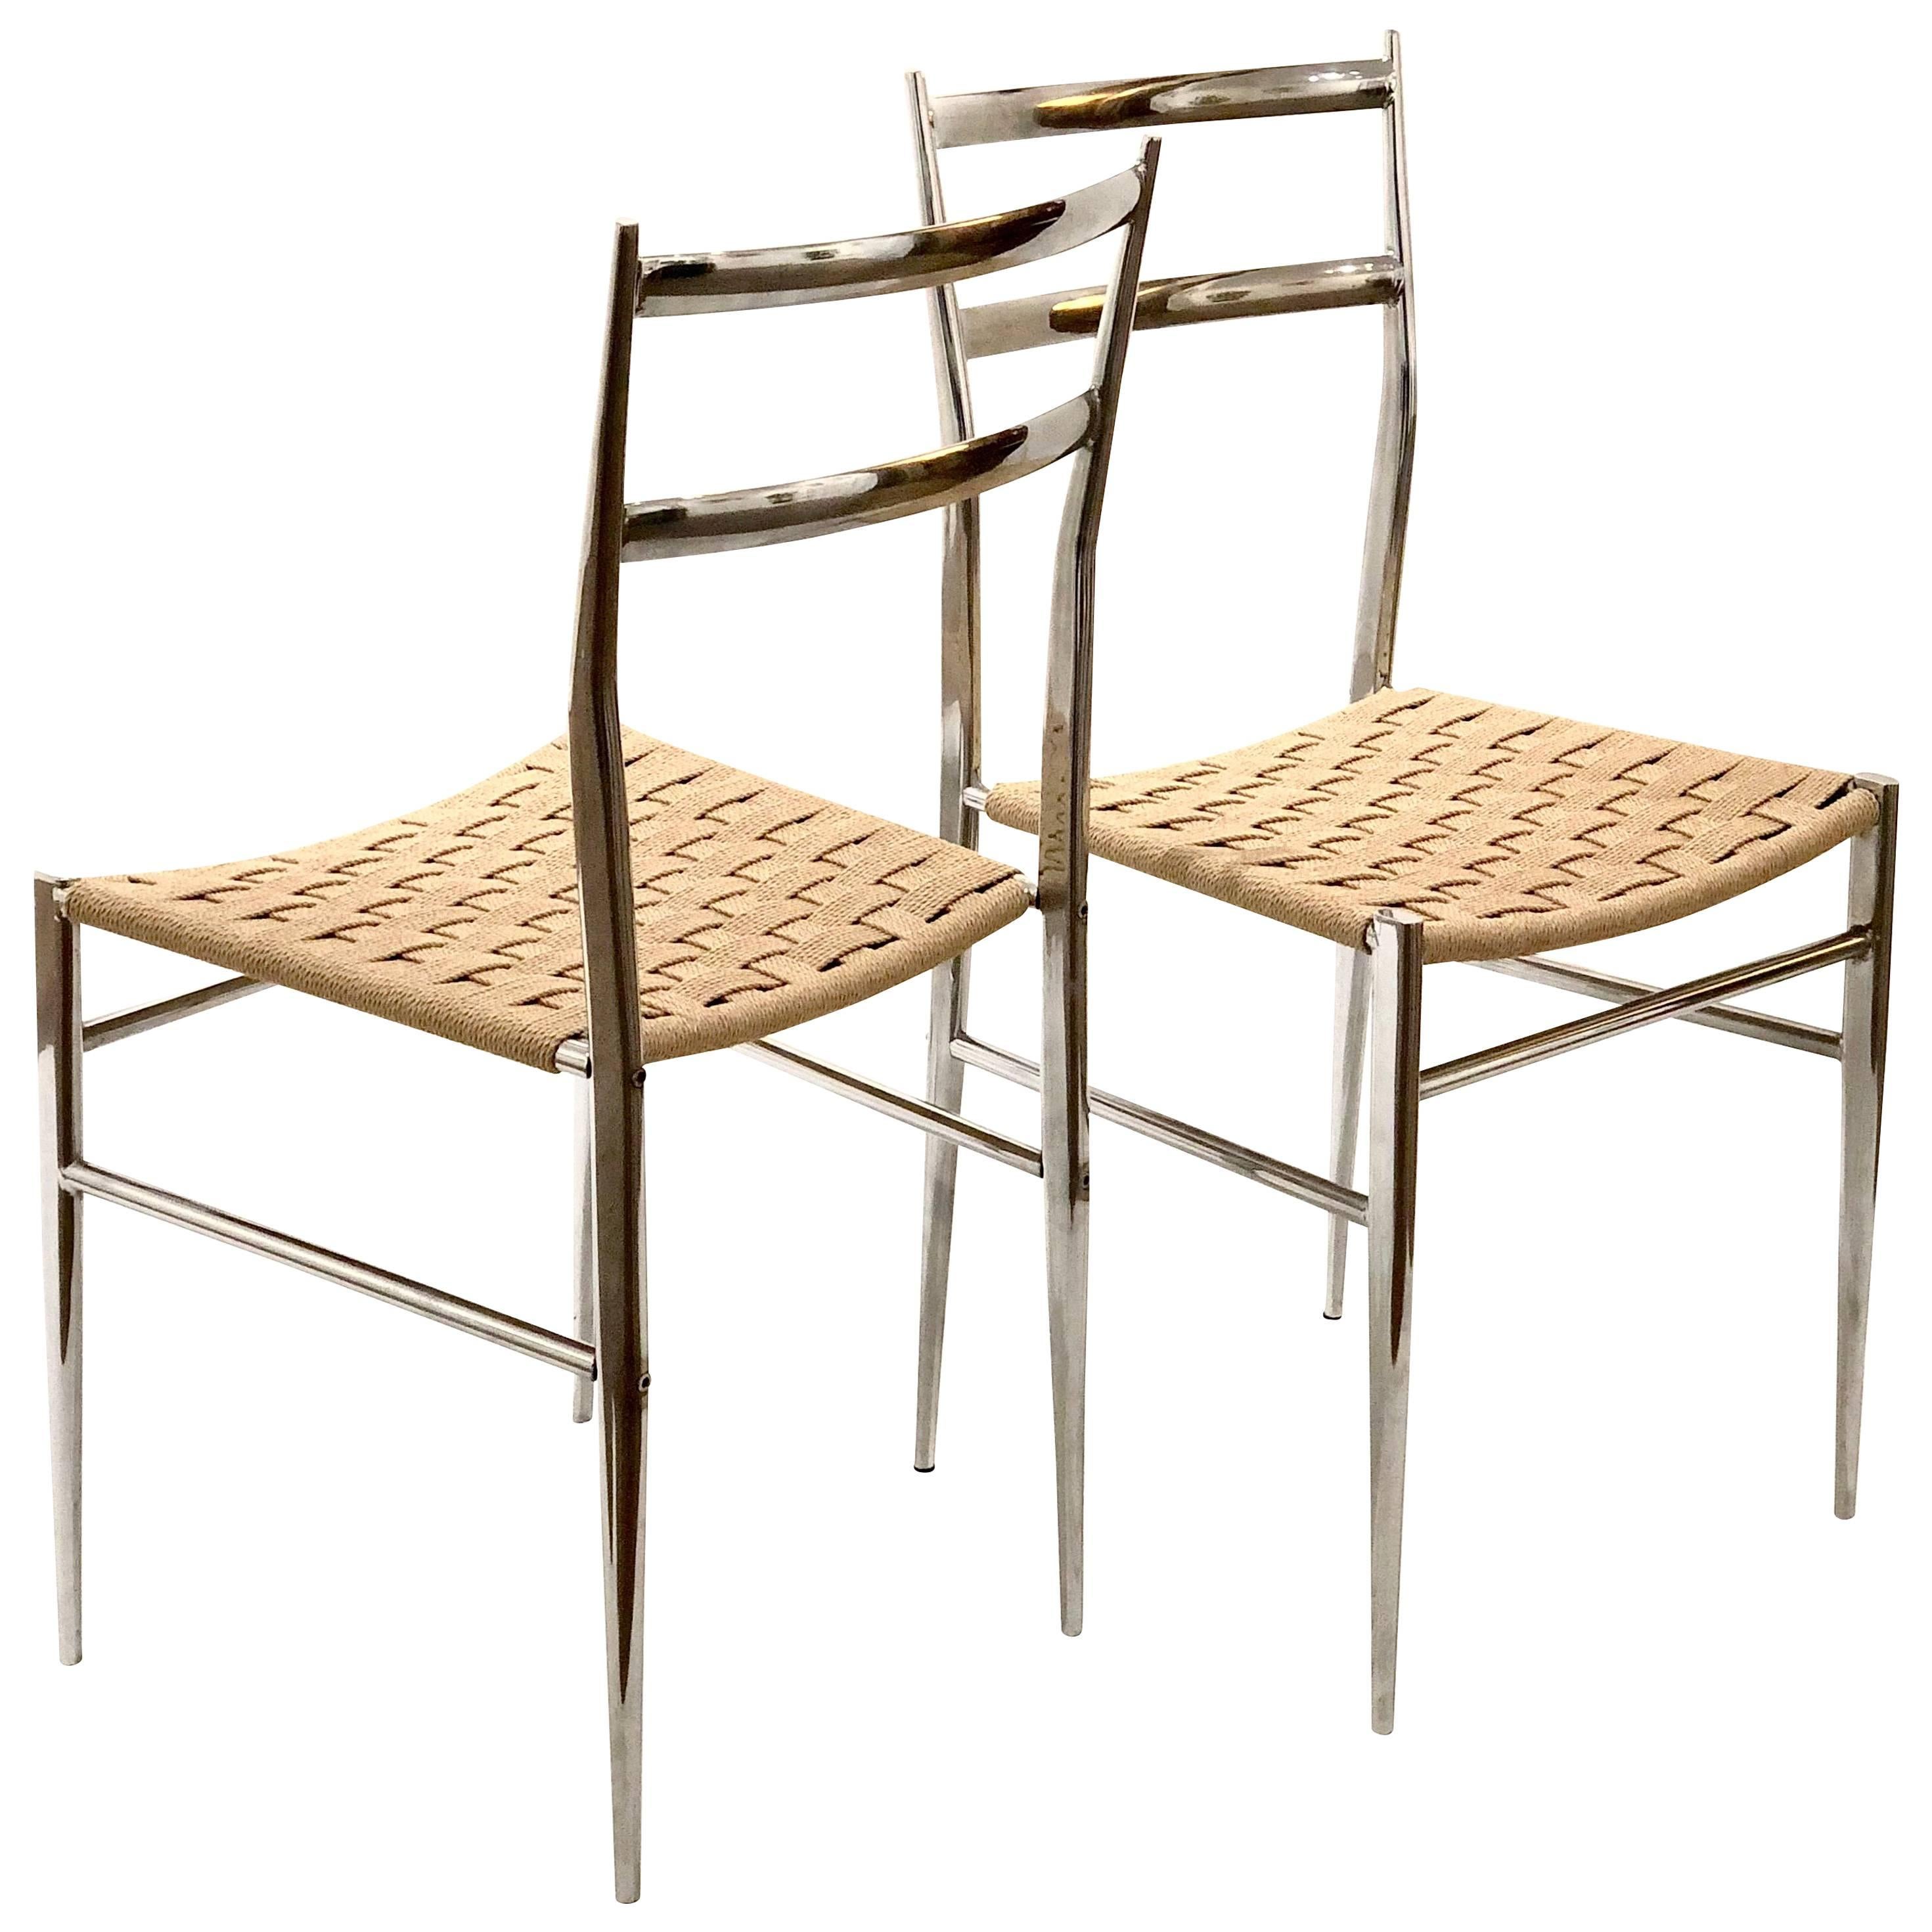 Pair of Side Chairs by Philippe Starck "Object Perdu" for Driade